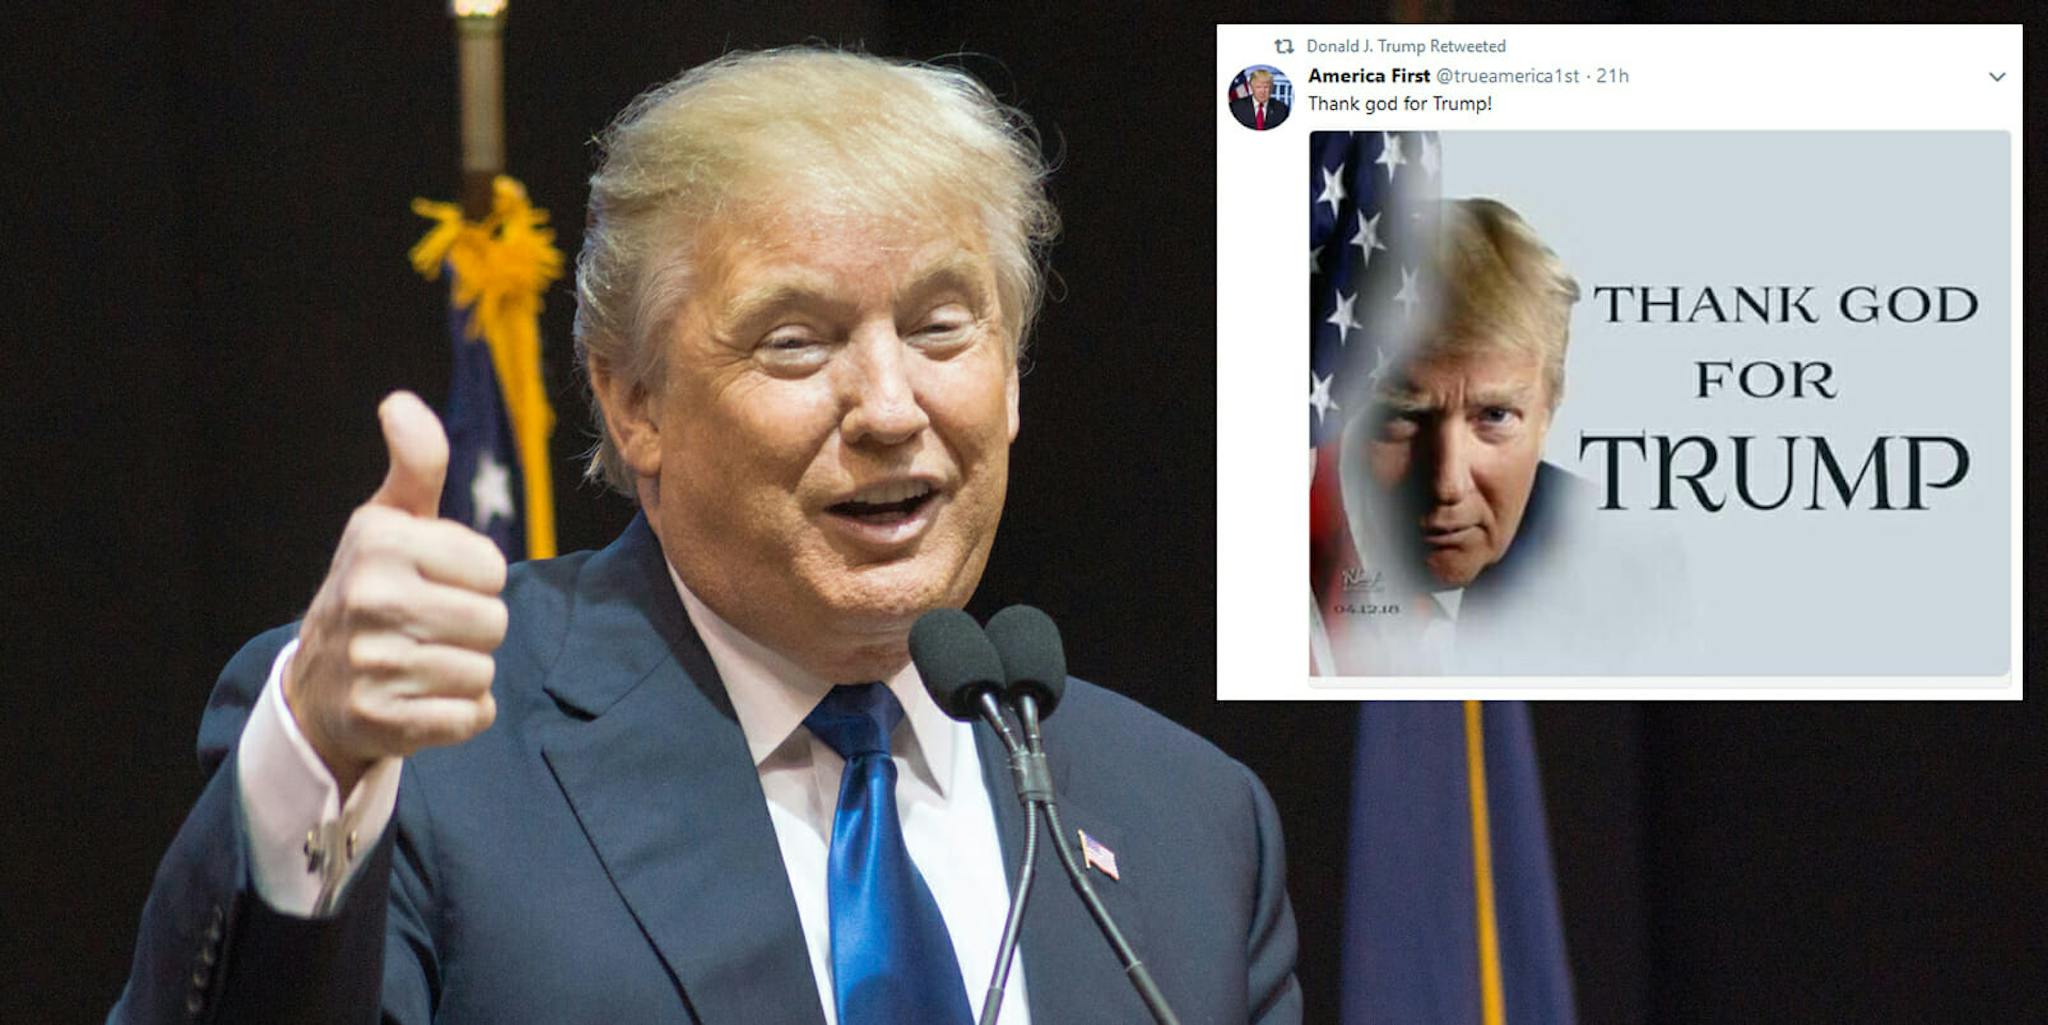 Trump Goes On A Retweeting Spree Posts A Bunch Of Pro Trump Memes